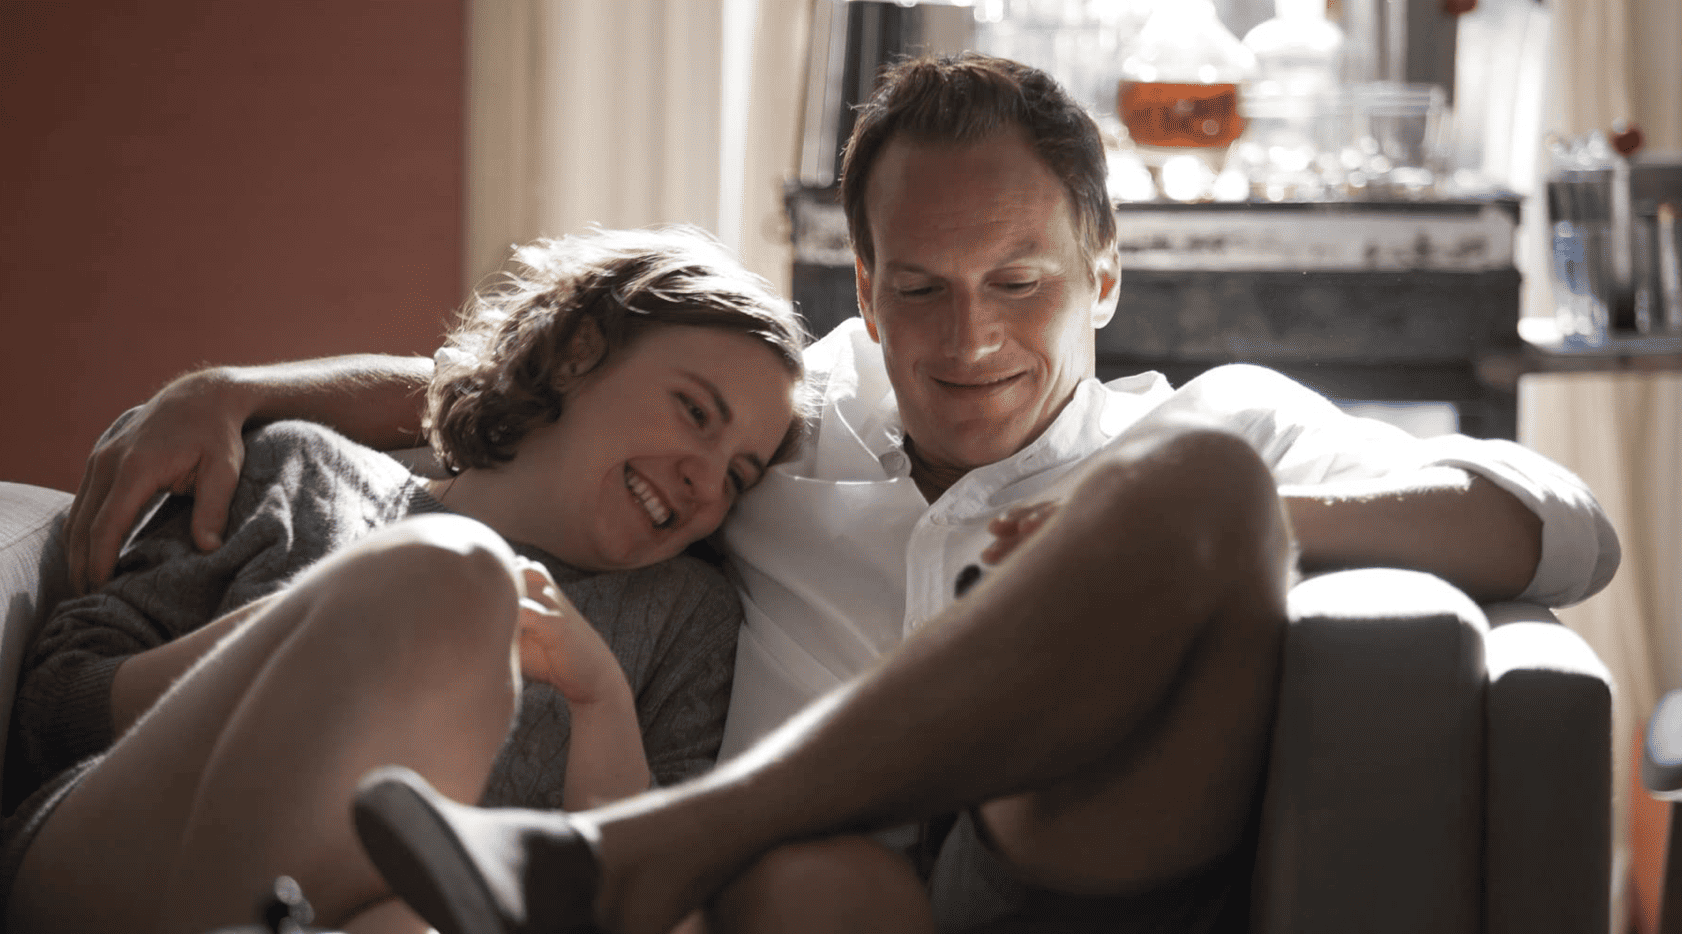 Hannah and Joshua cuddle and laugh together in this image from Apatow Productions